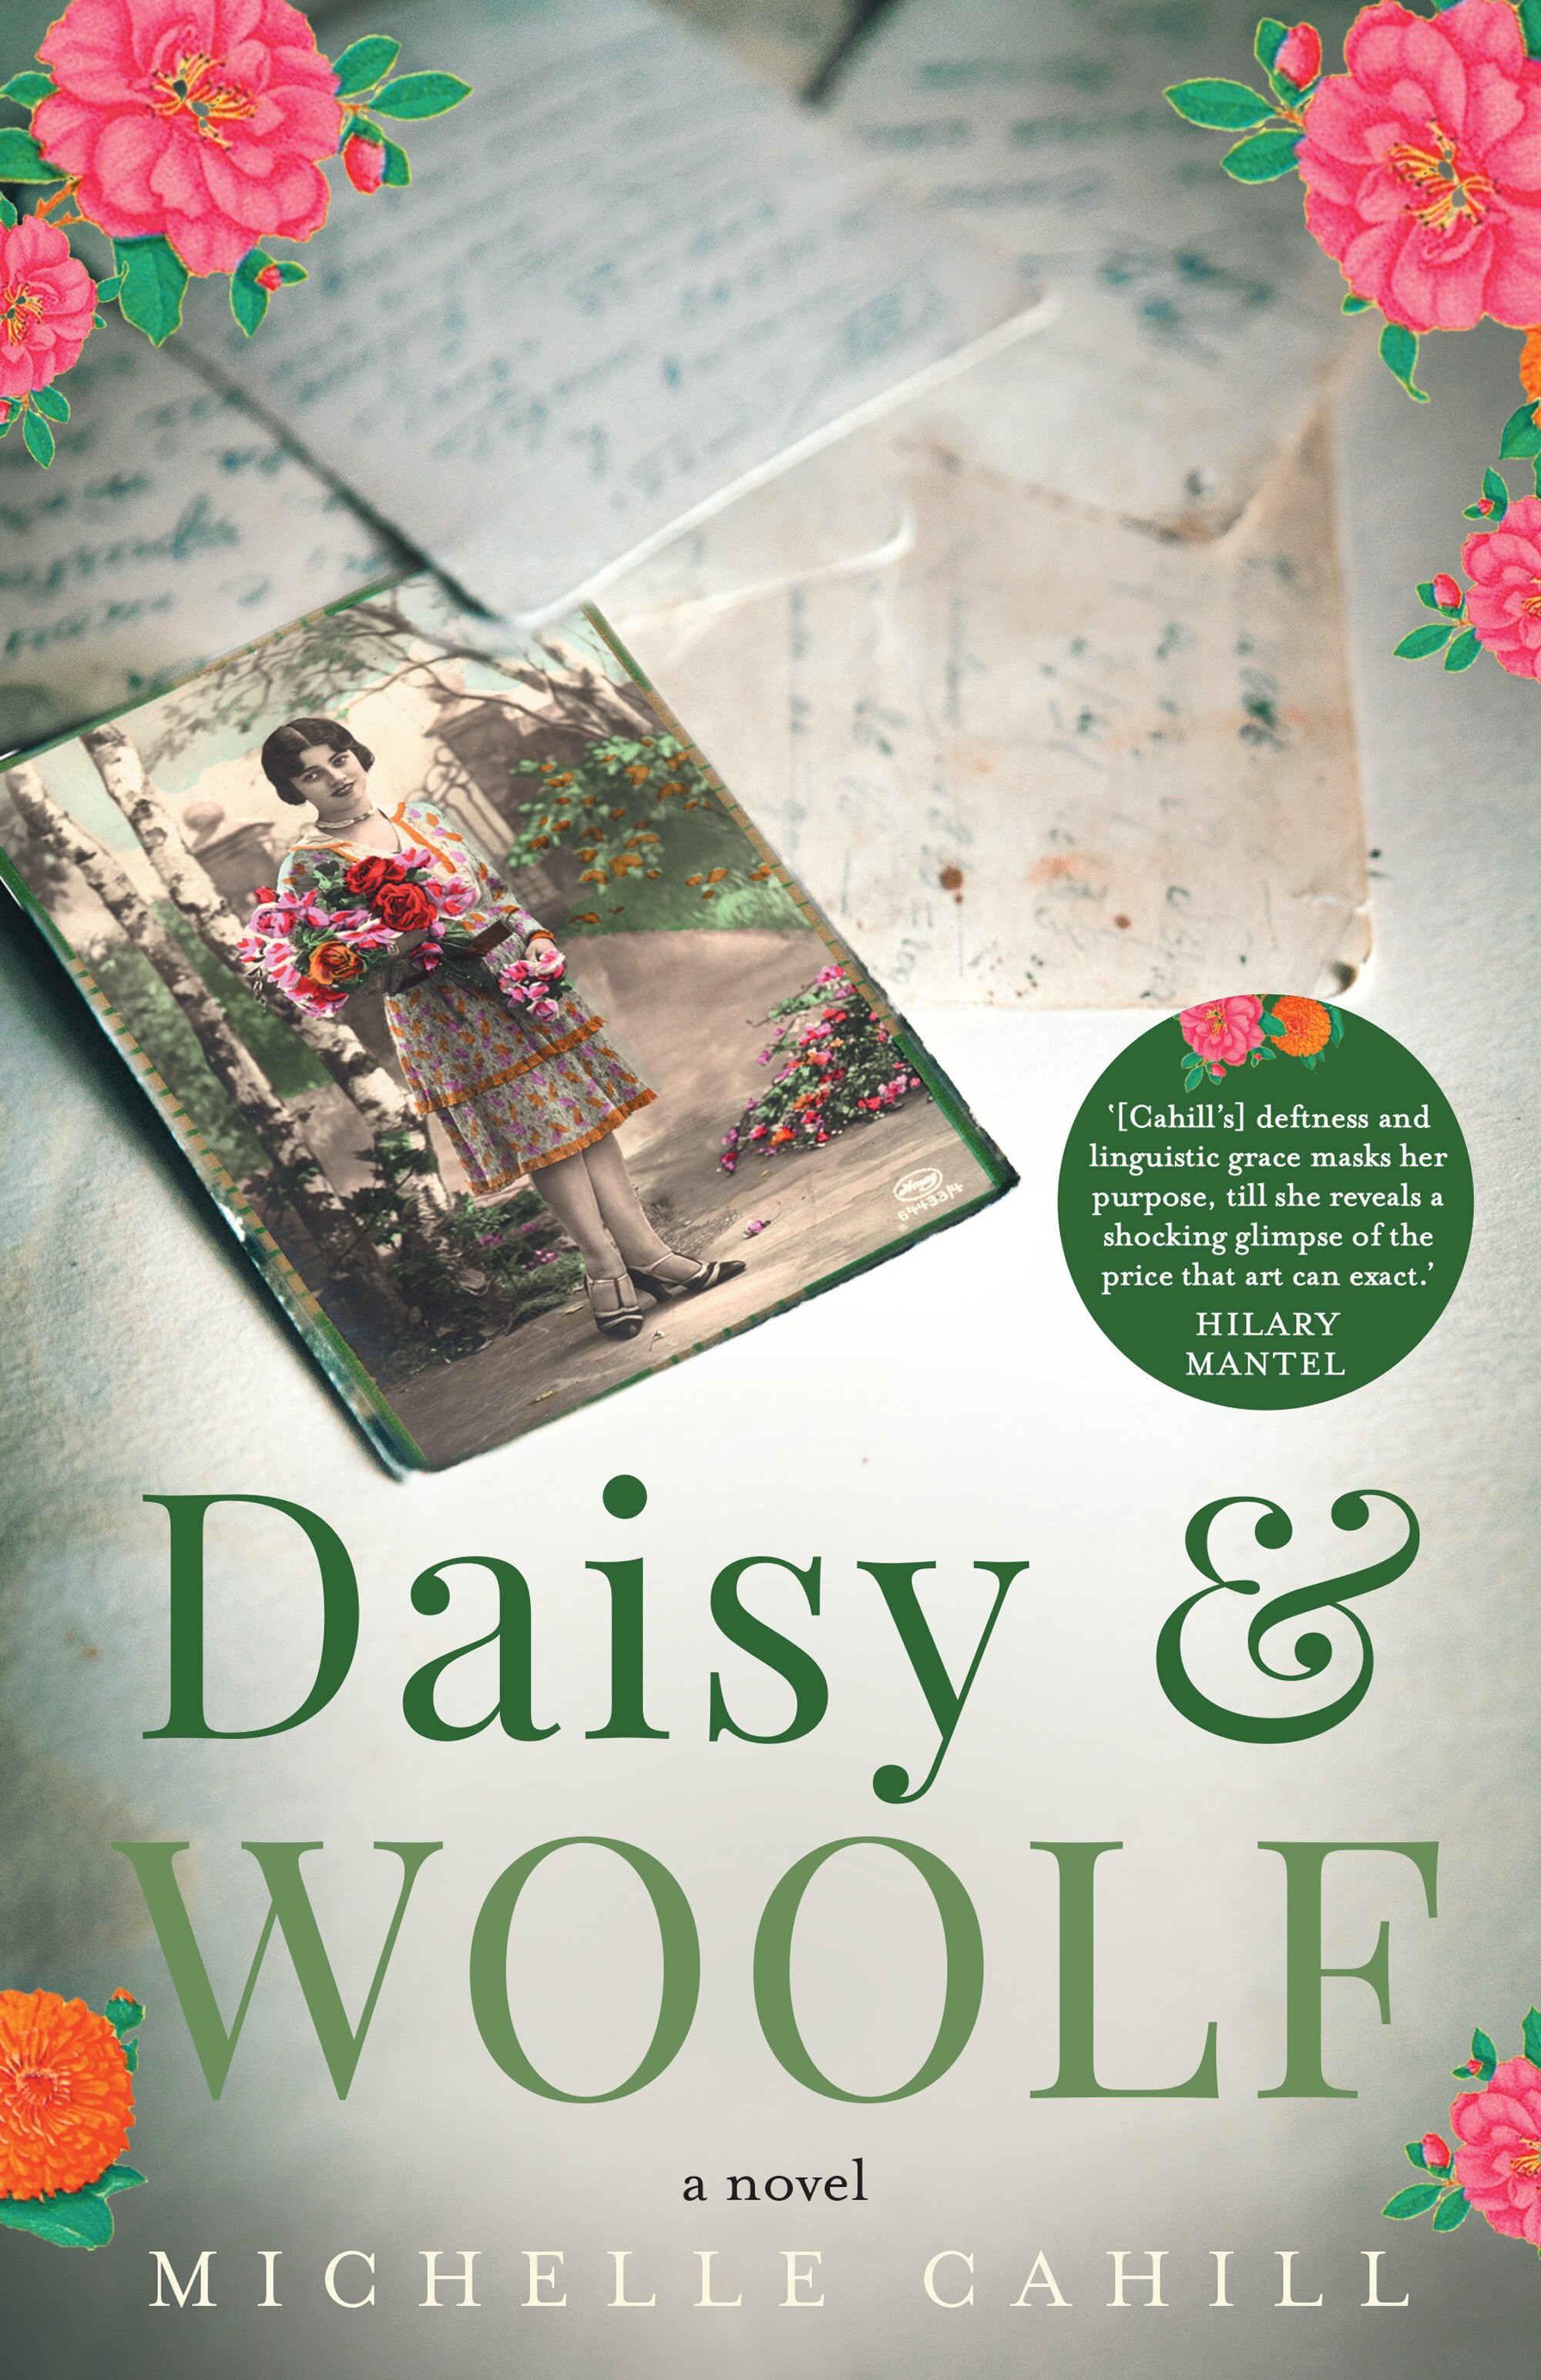 Cover of Daisy and Woolf by Michelle Cahill featuring a picture of a young woman holding a bouquet of pink flowers